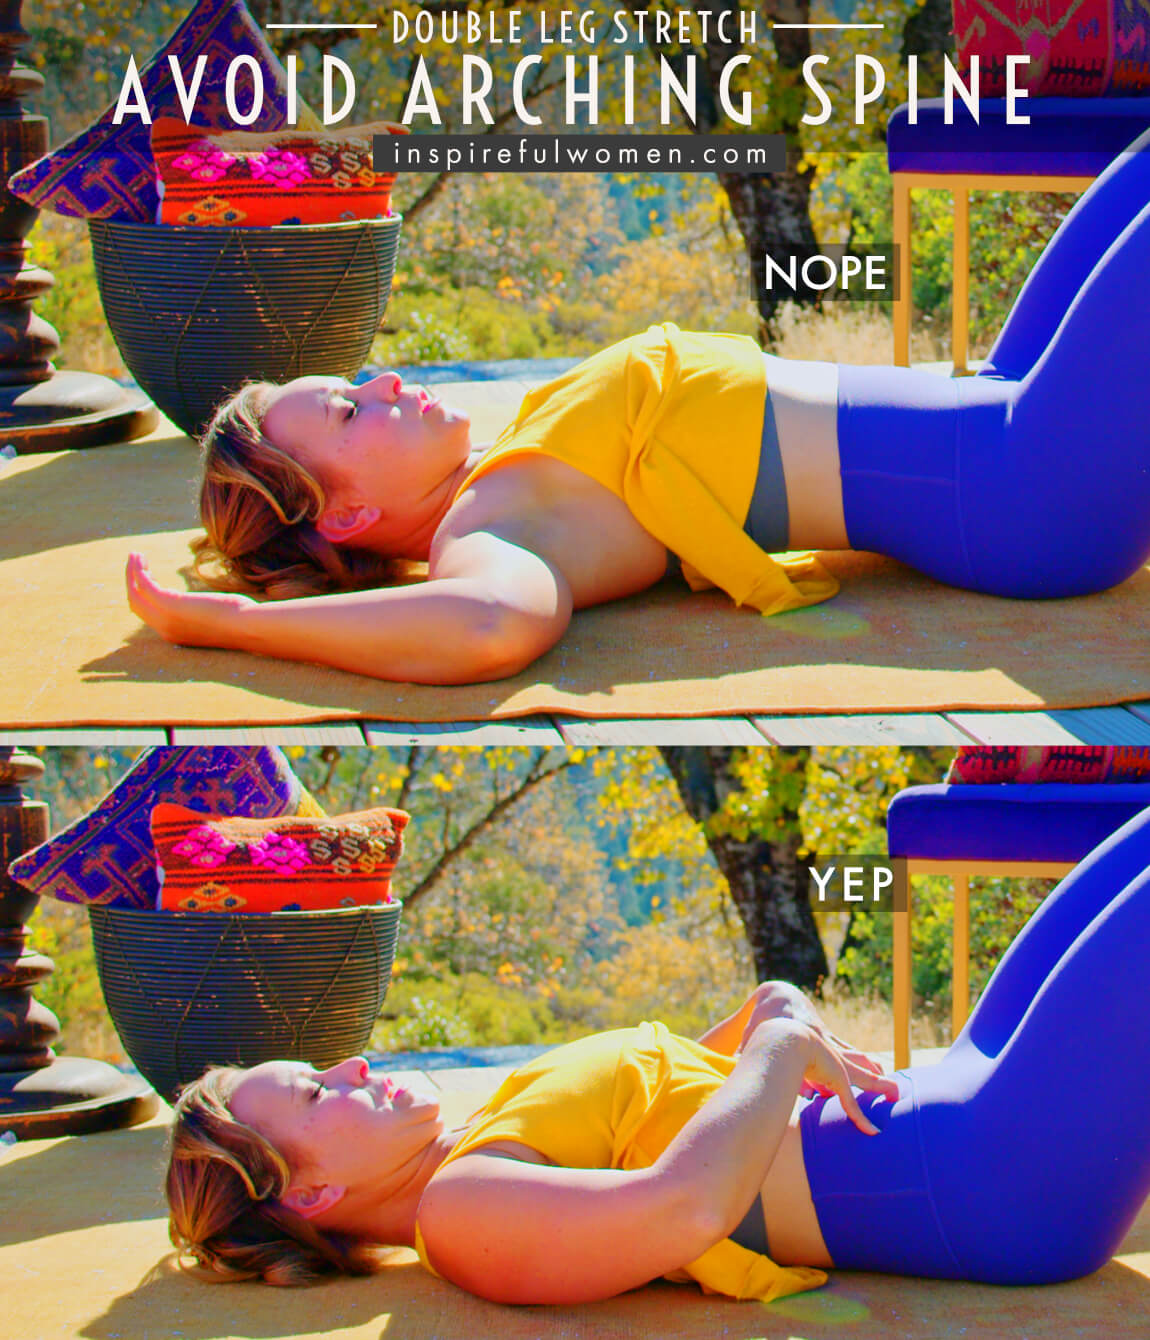 avoid-arching-spine-double-leg-stretch-pilates-core-exercise-proper-form